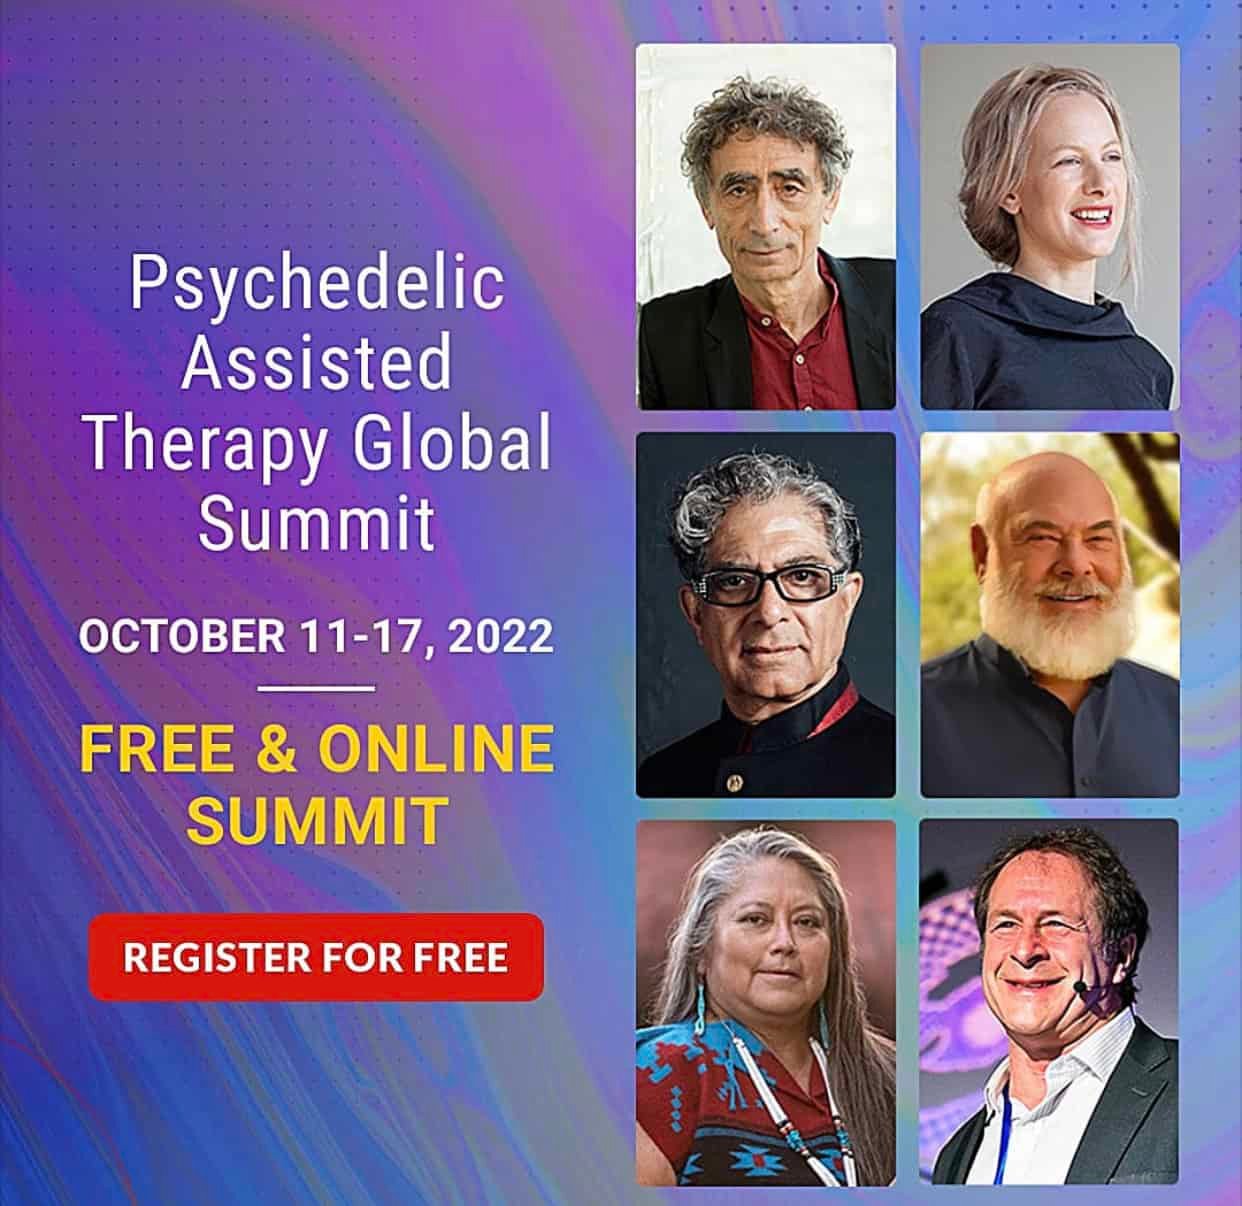 Psychedelic AssistedTherapy Global Summit Kaalogii